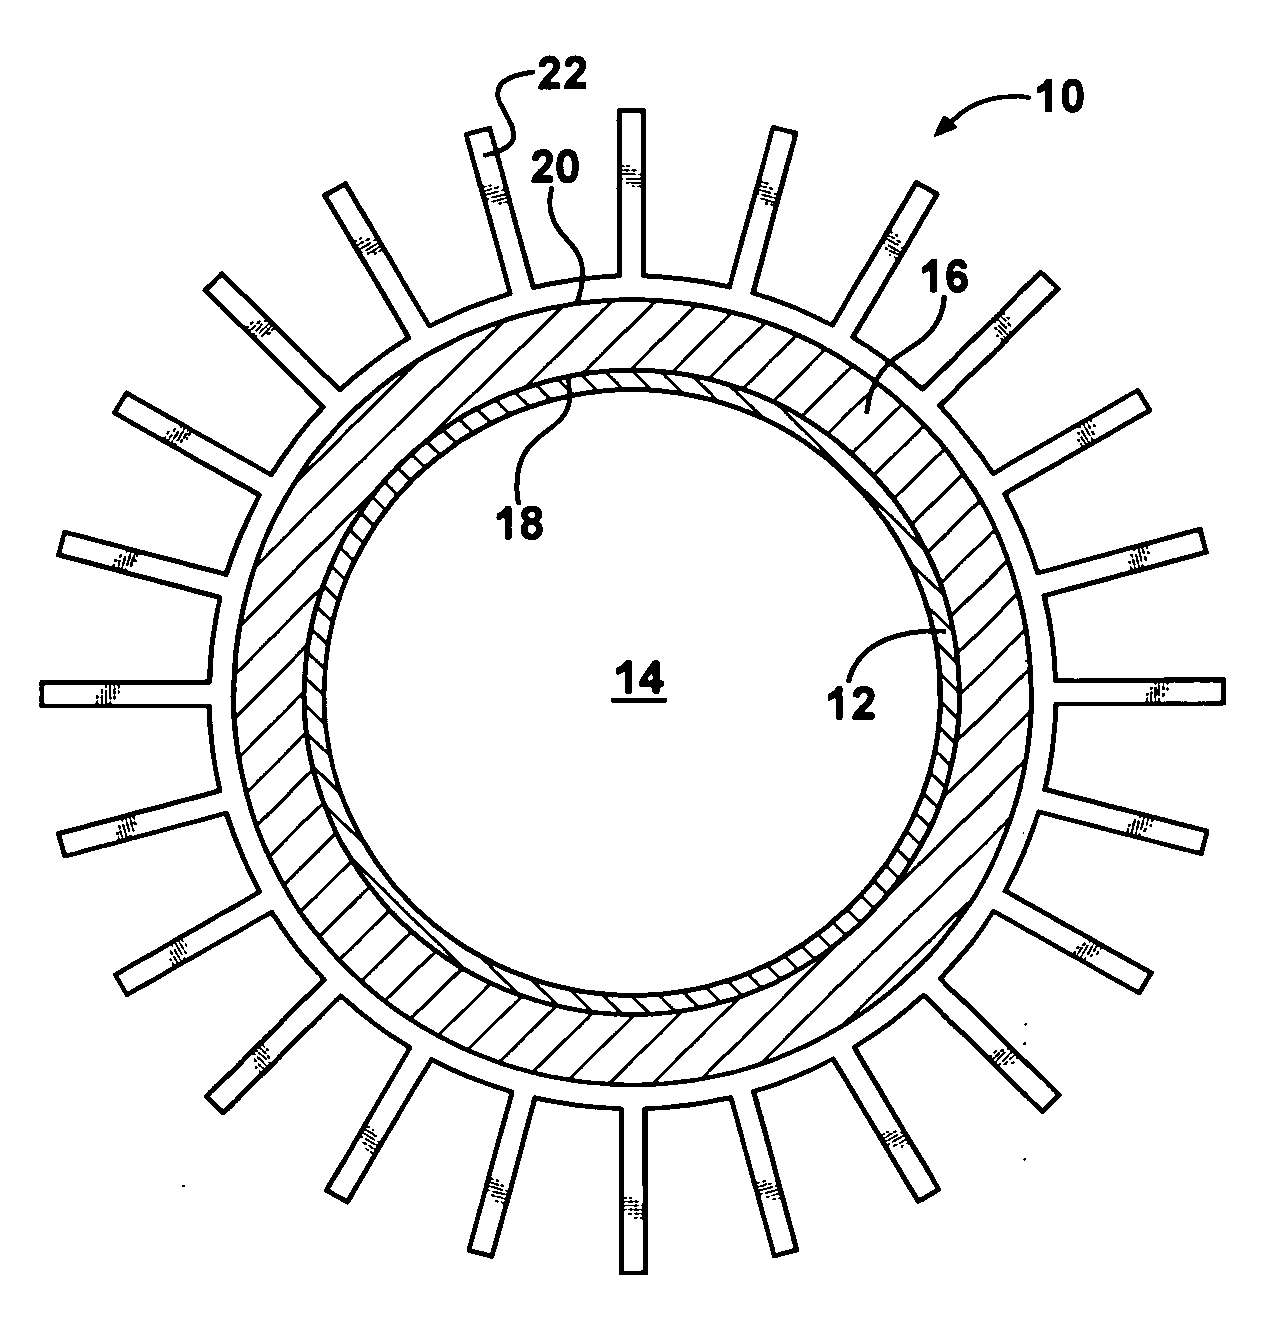 Heat exchanger tube having integrated thermoelectric devices